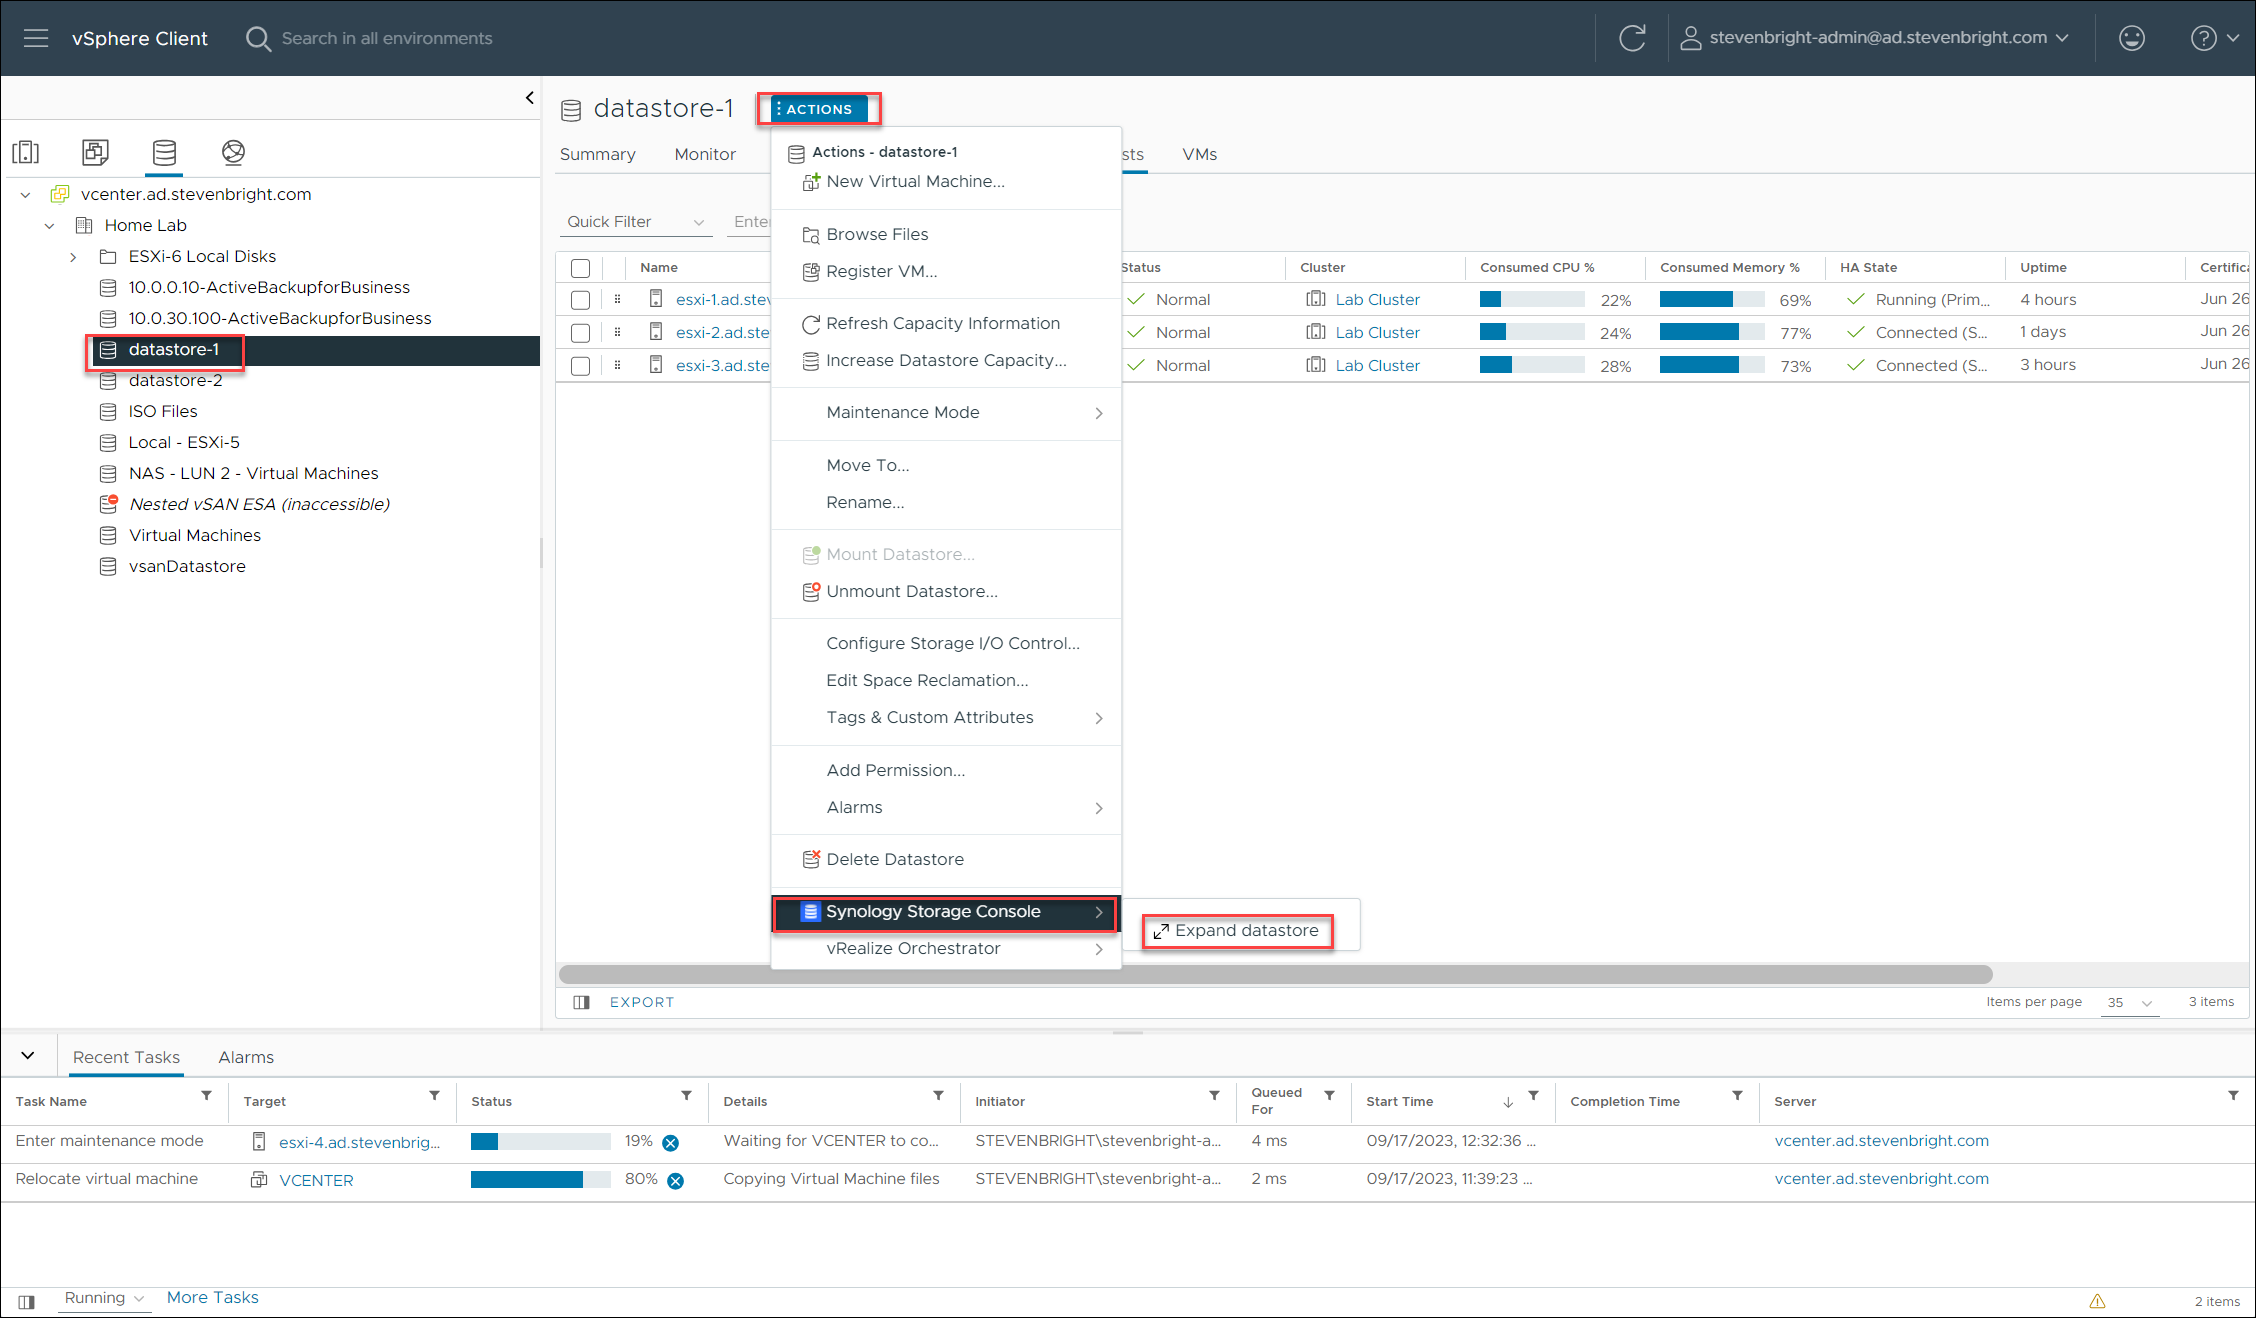 VMware vSphere Client - Accessing the Synology Storage Console Expand Datastore Option